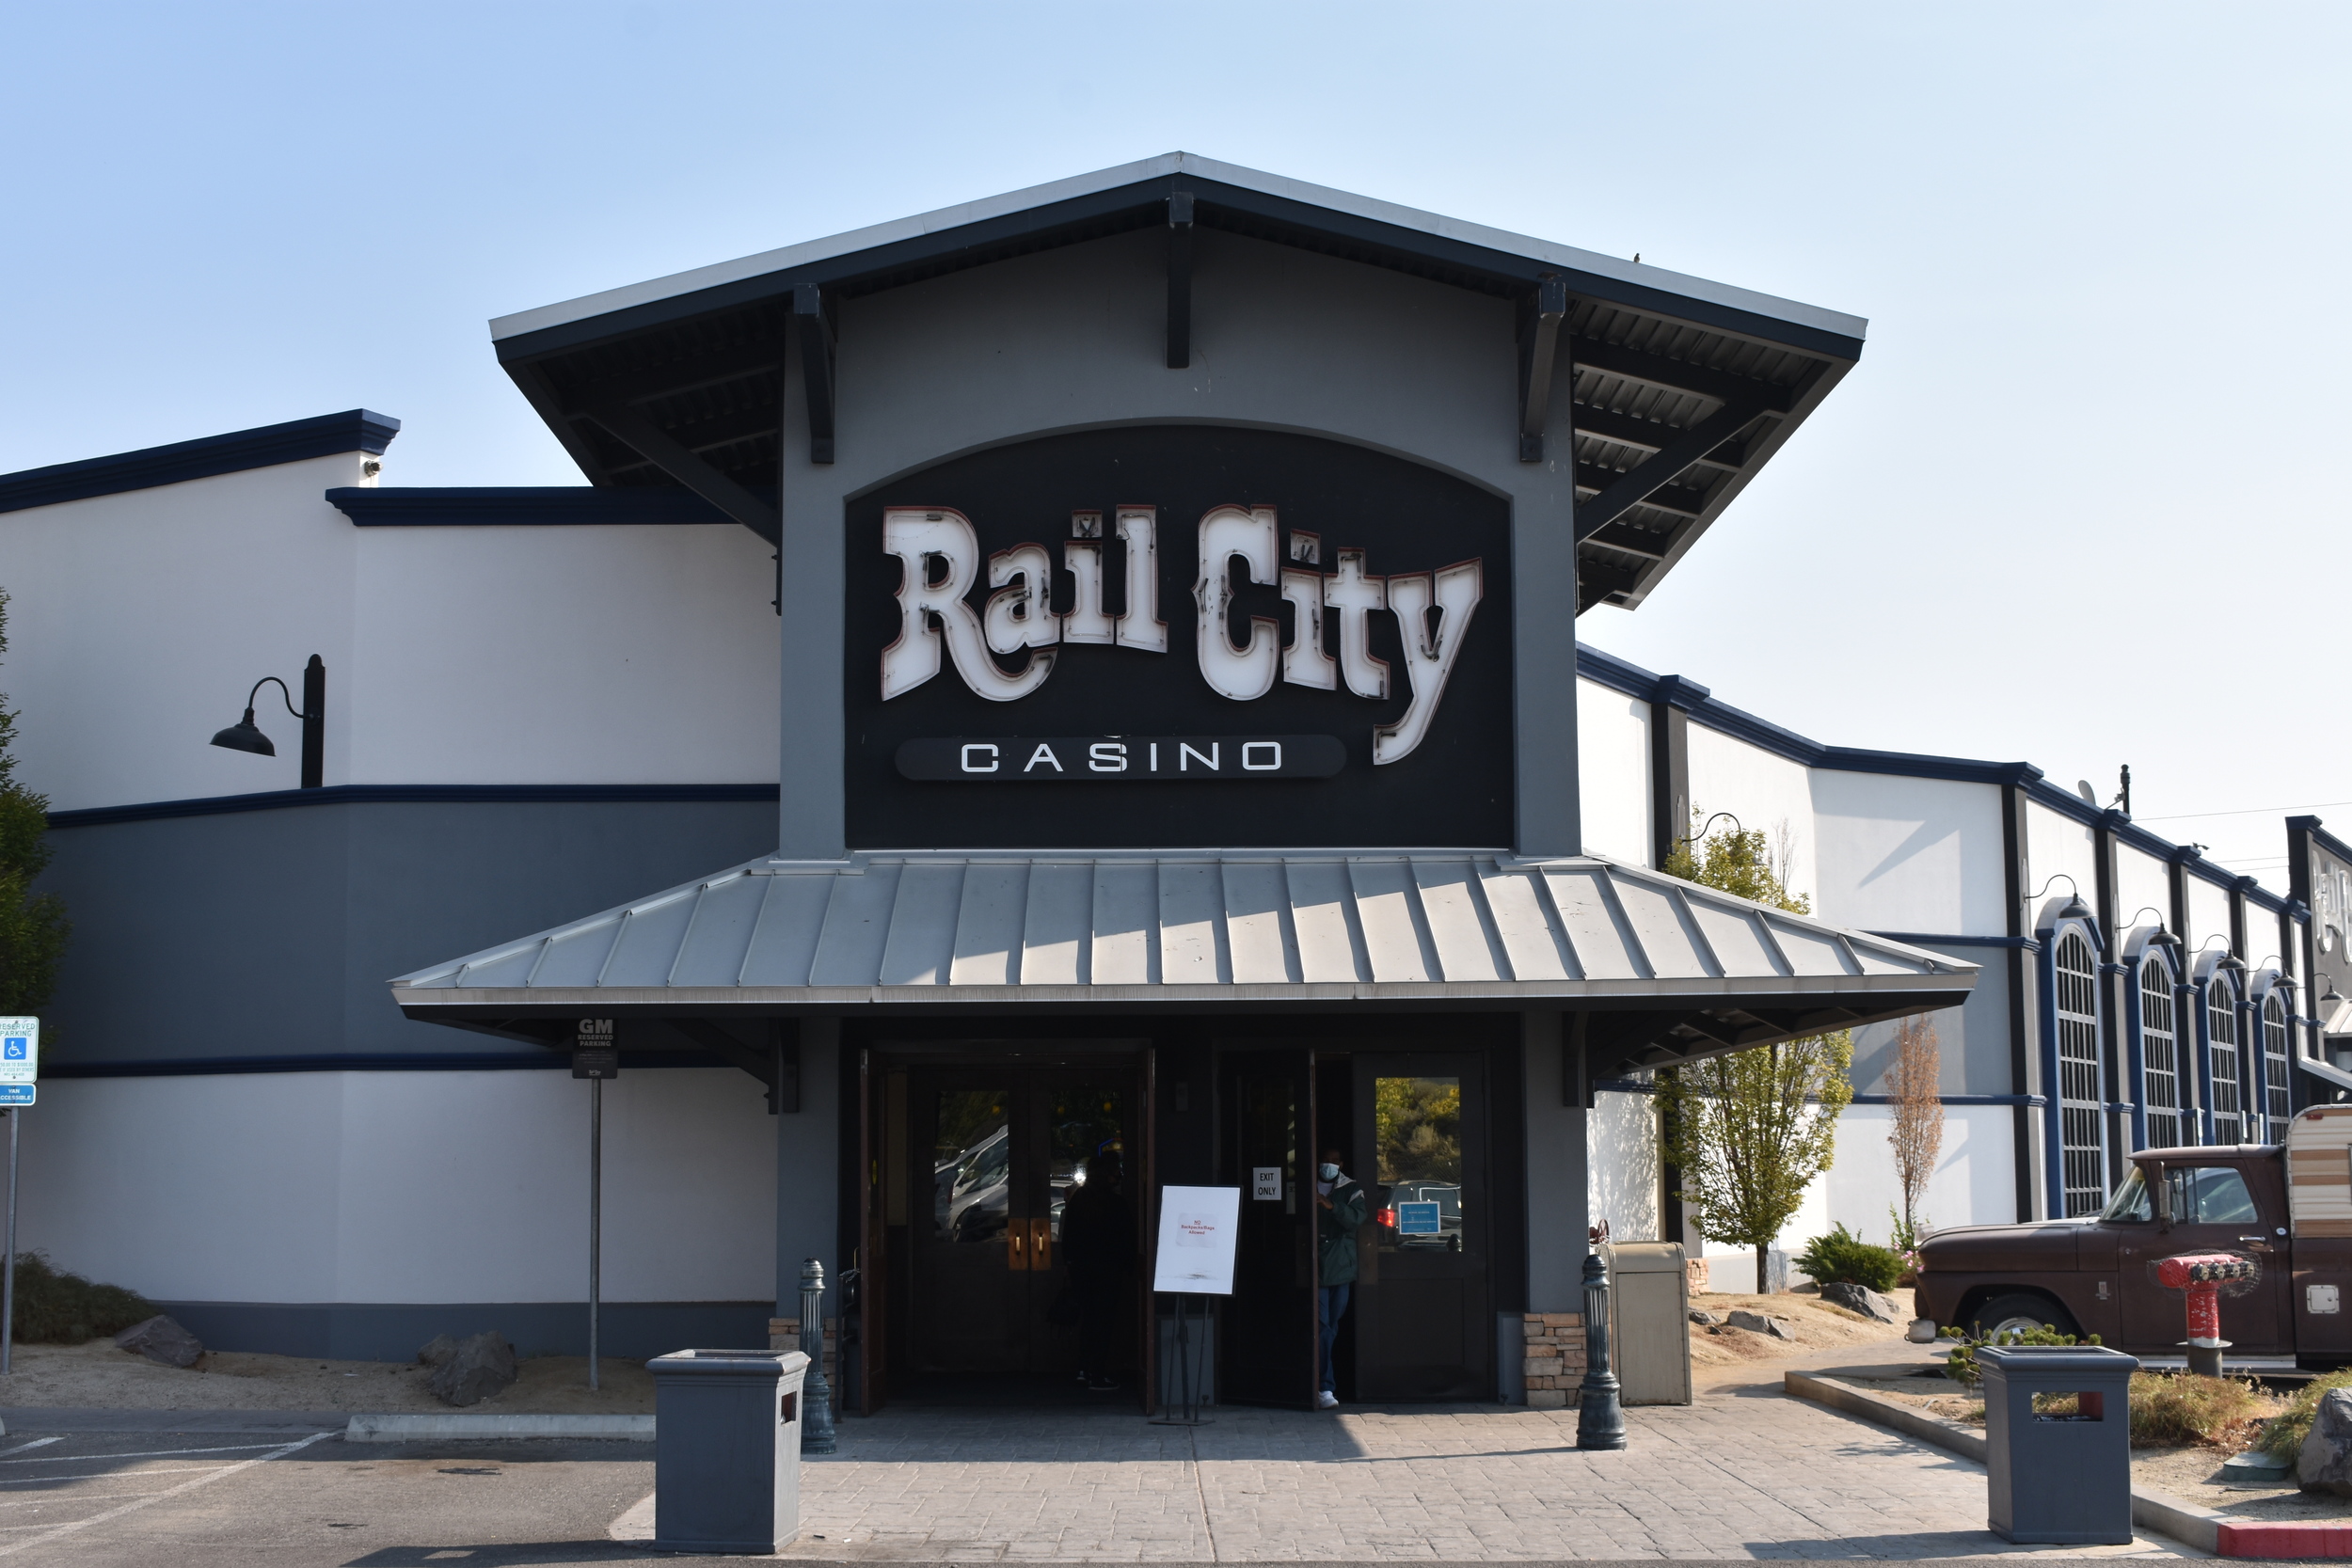 Rail City Casino wall mounted sign, Sparks, Nevada